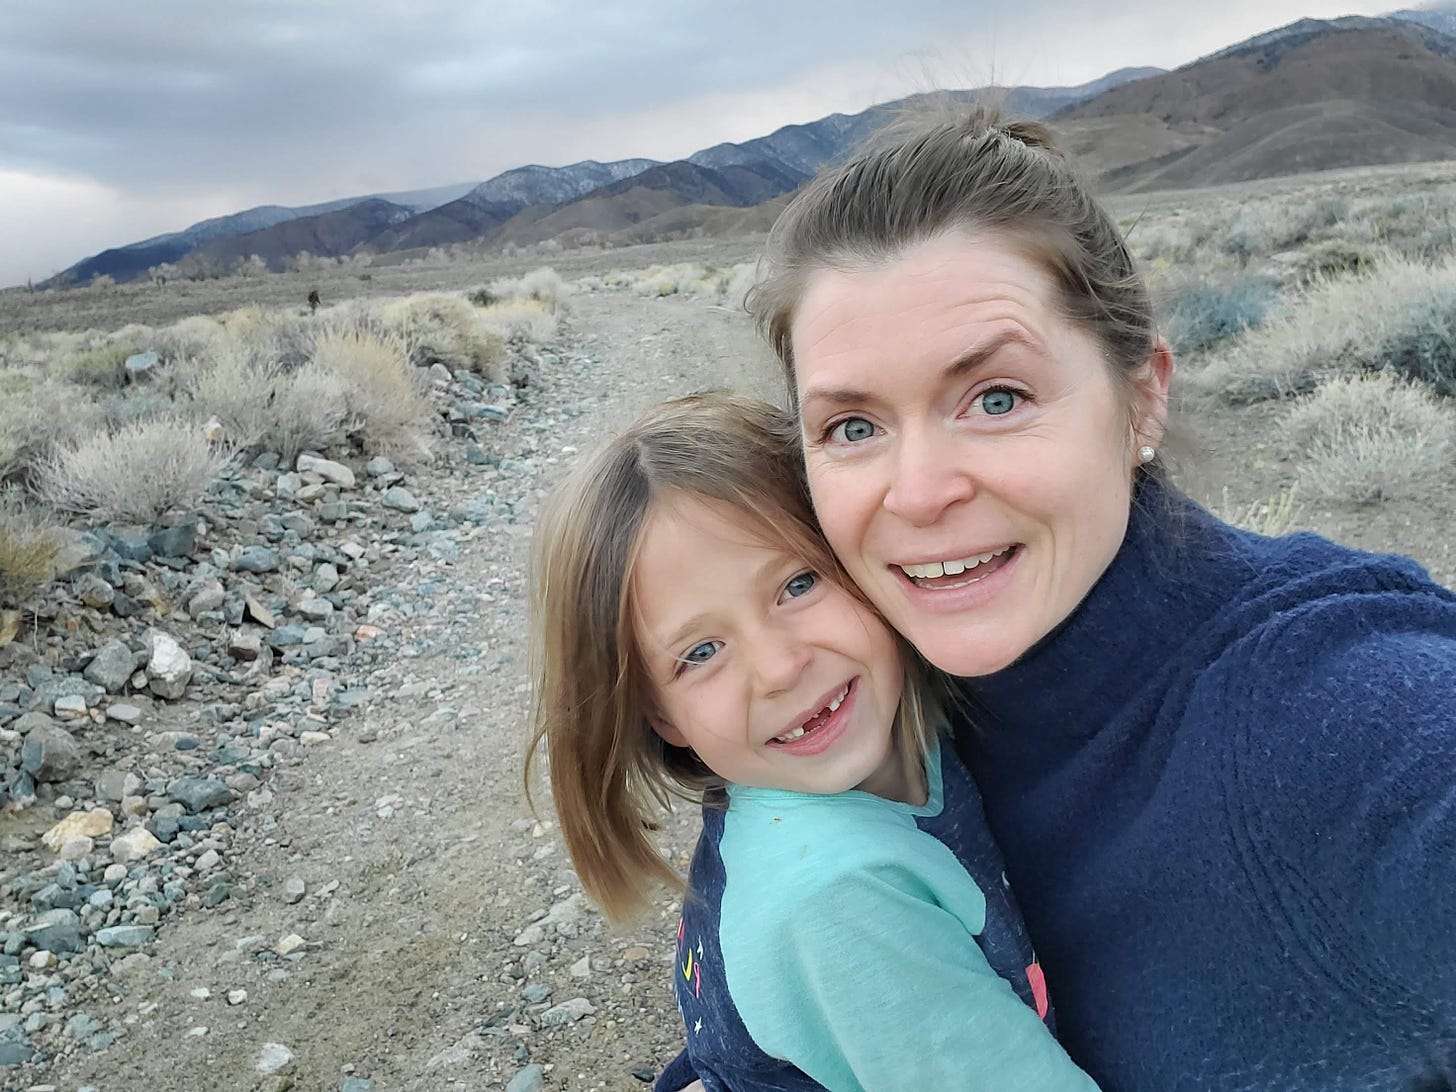 Charlotte and L taking a selfie on a dirt road with White Mountains in background.